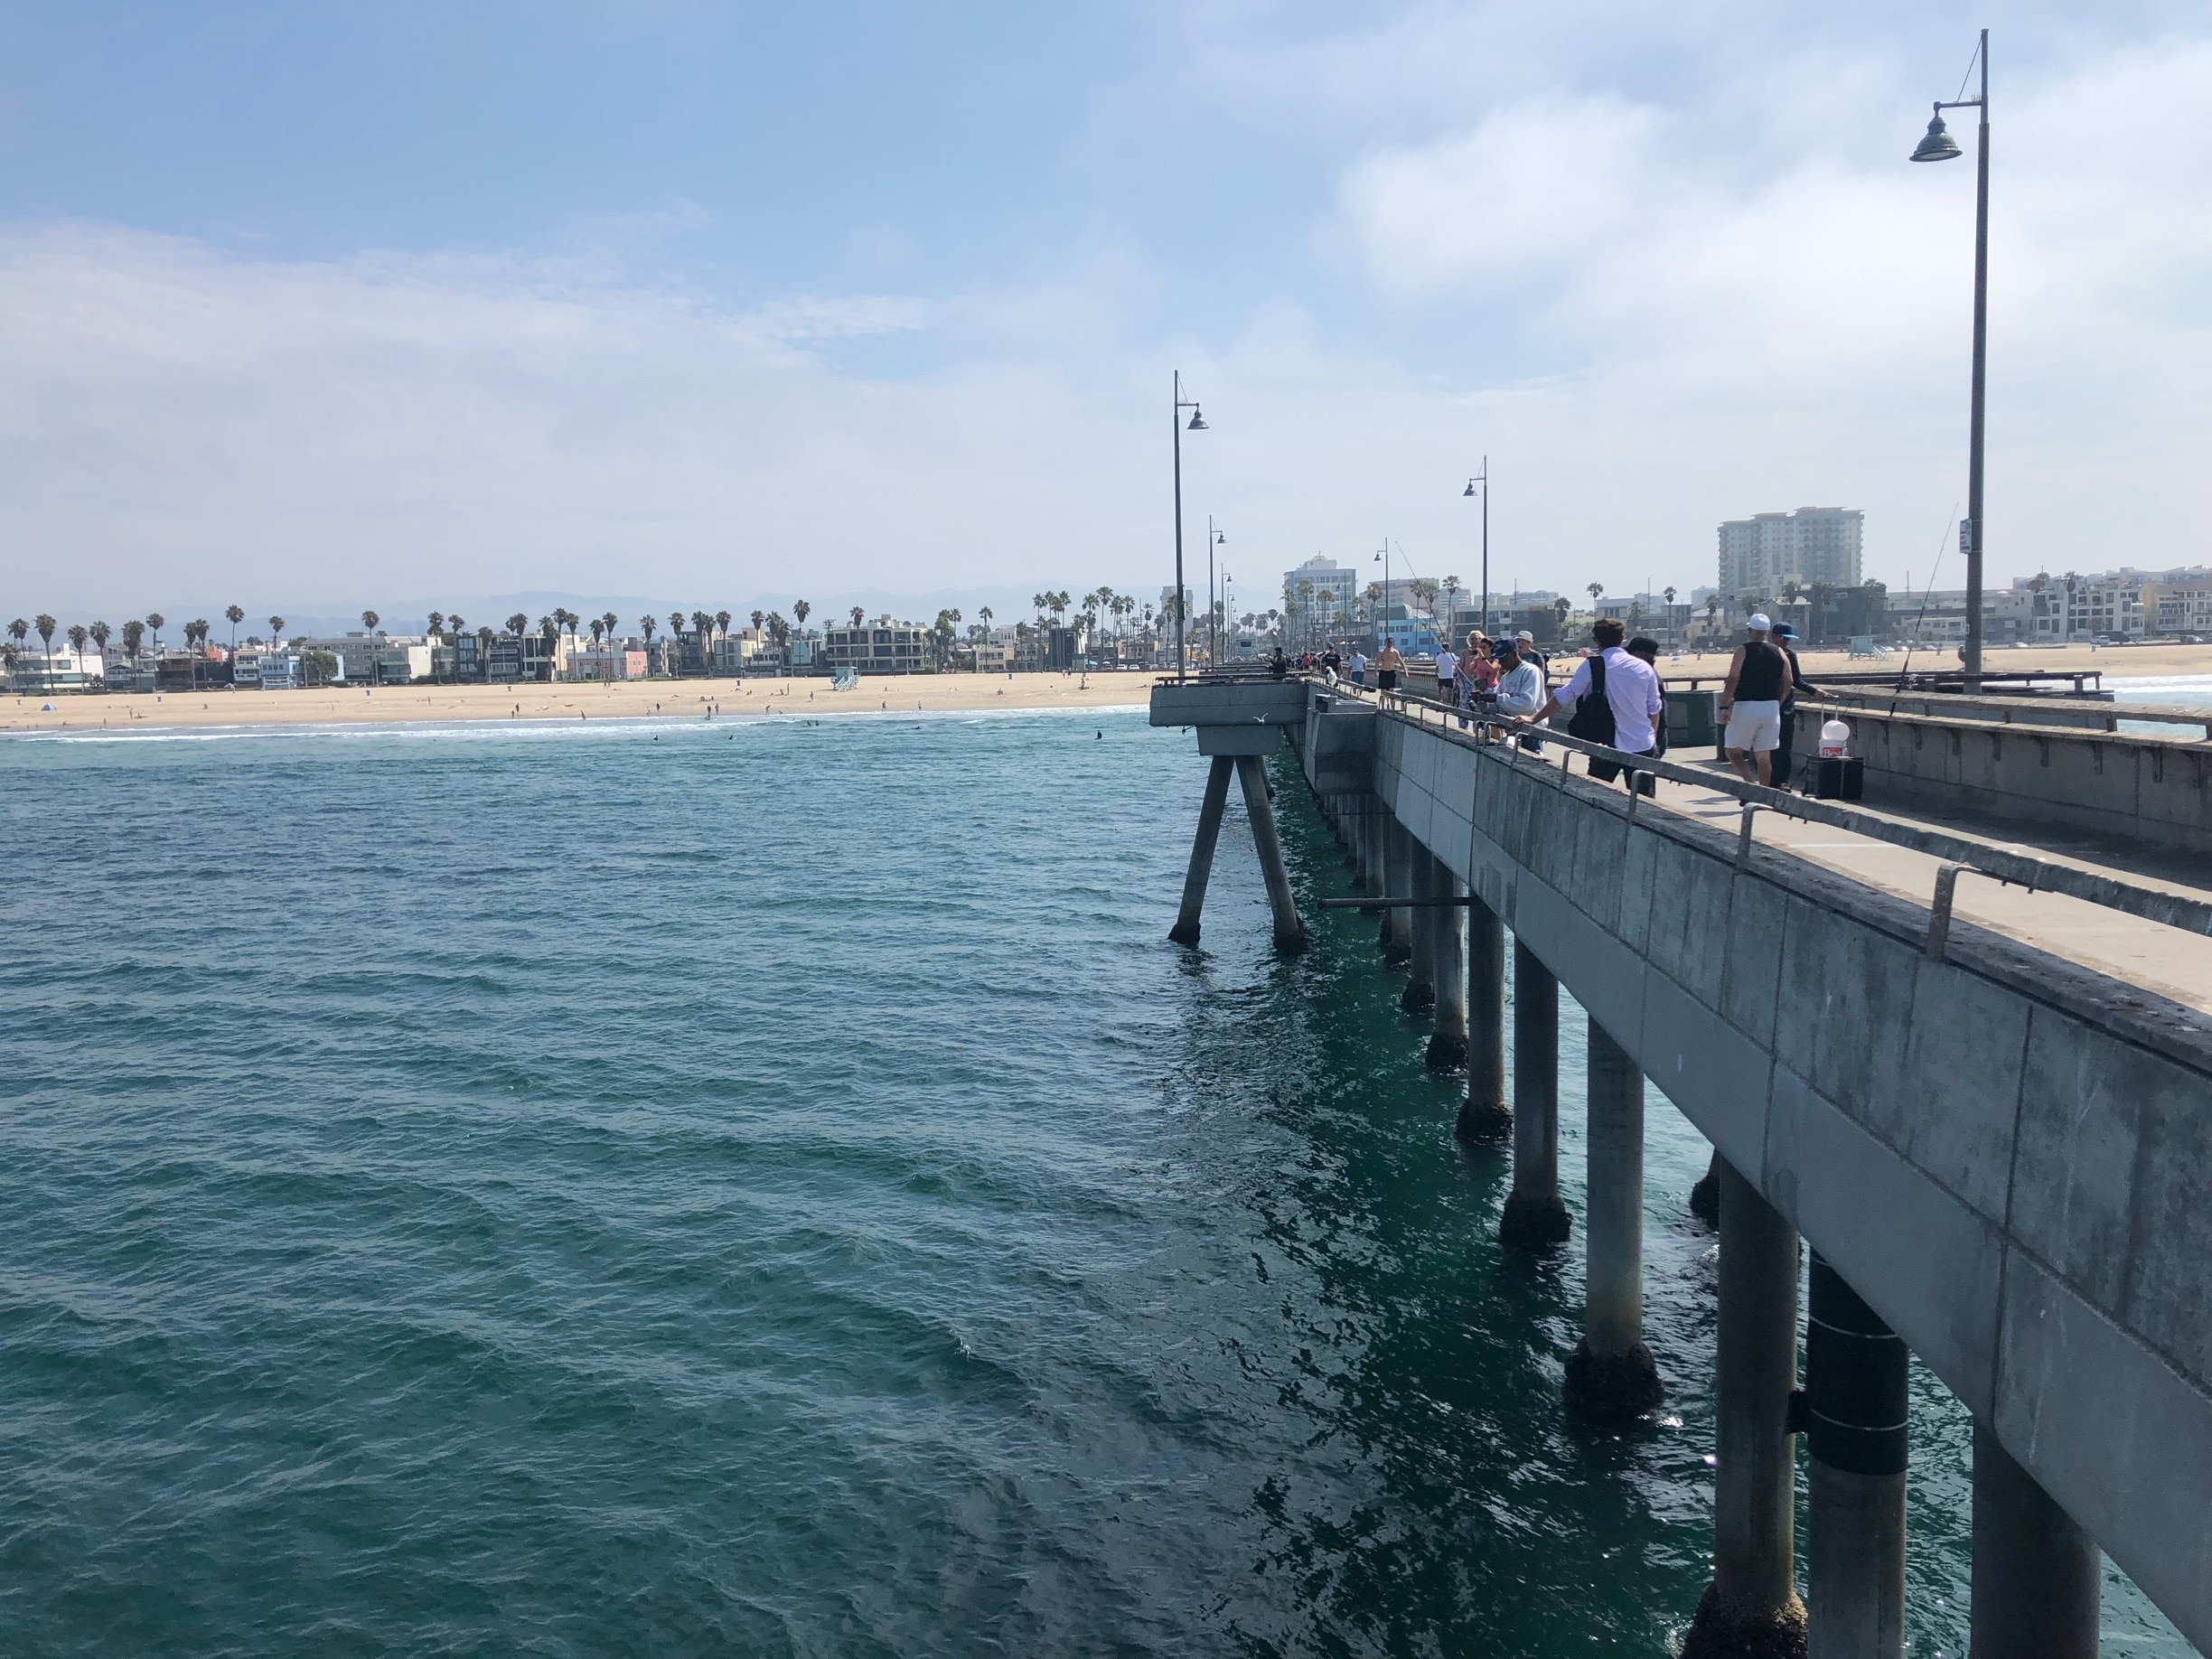 A view from the pier.